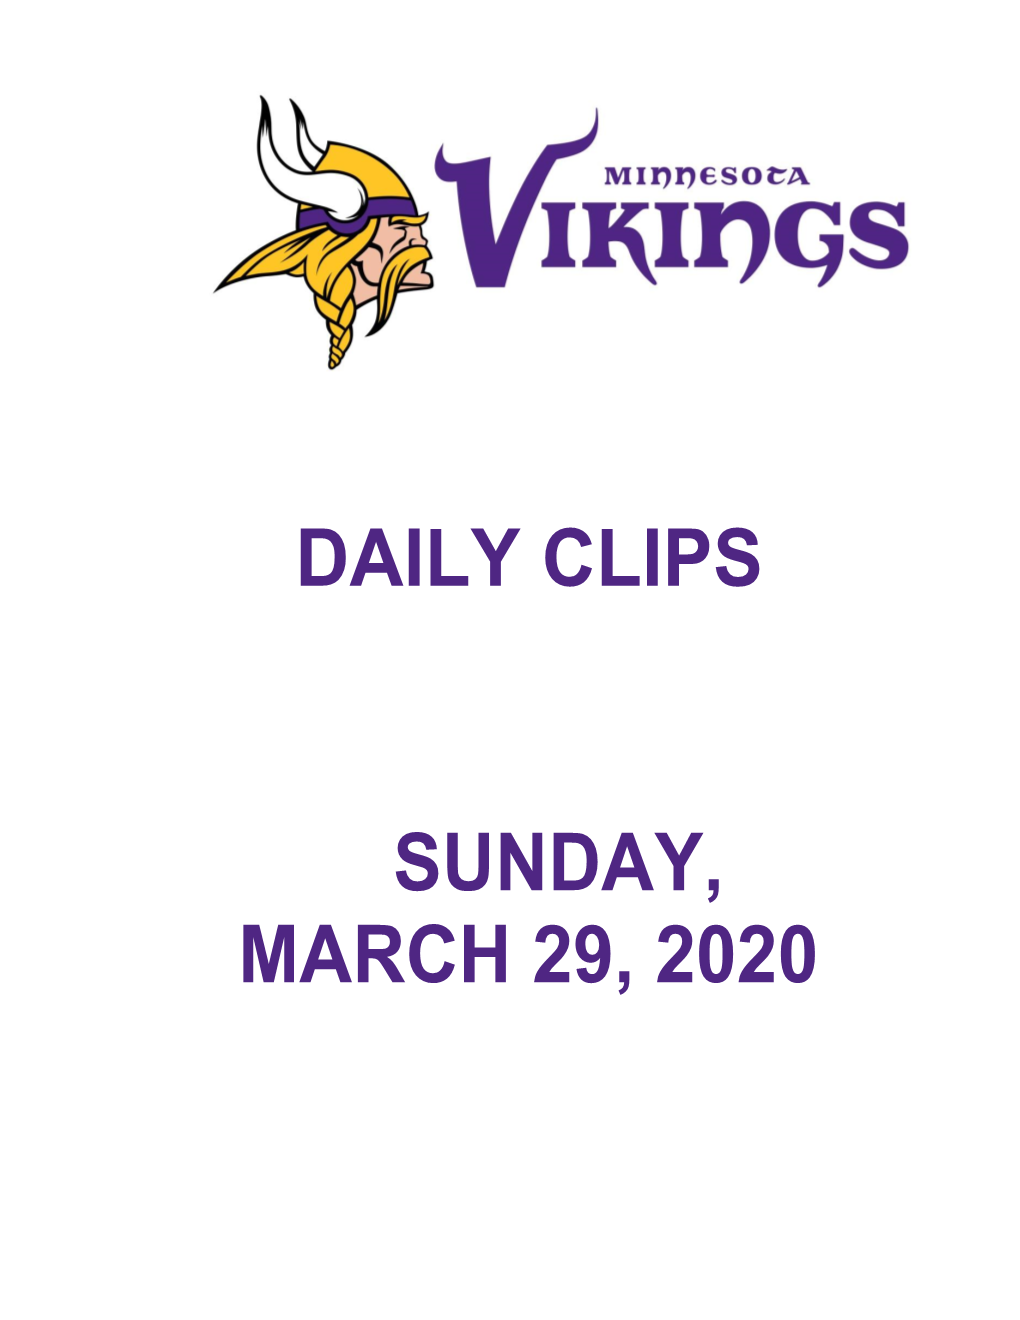 Daily Clips Sunday, March 29, 2020